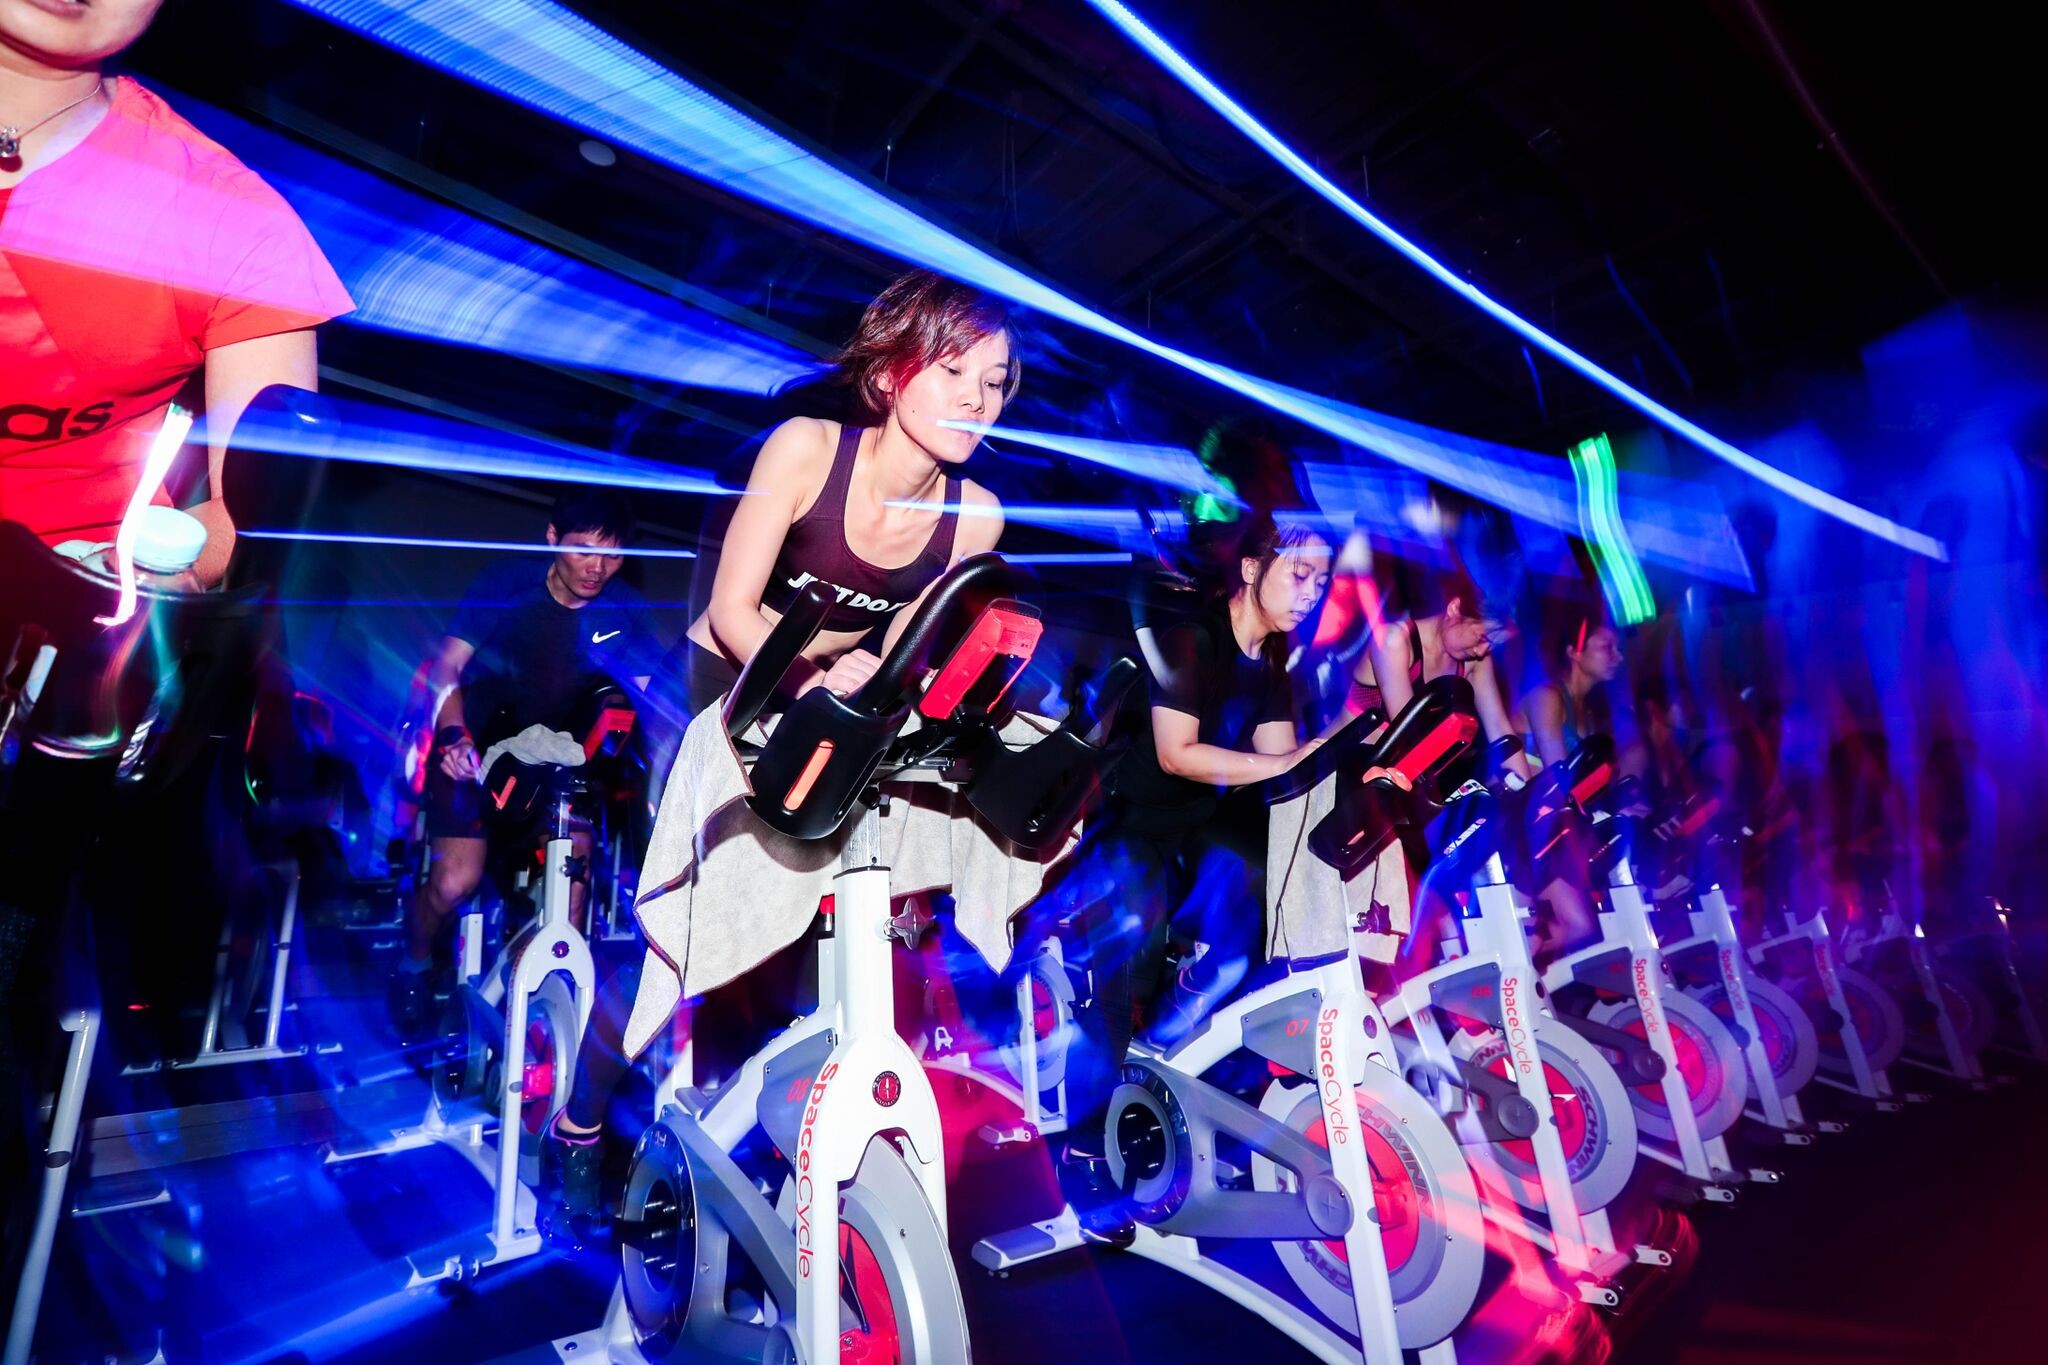 China fitness chain Space Cycle offers indoor cycling, yoga and barre classes with instructors who curate music, lighting effects and even scents. Photo: Courtesy of Space Cycle